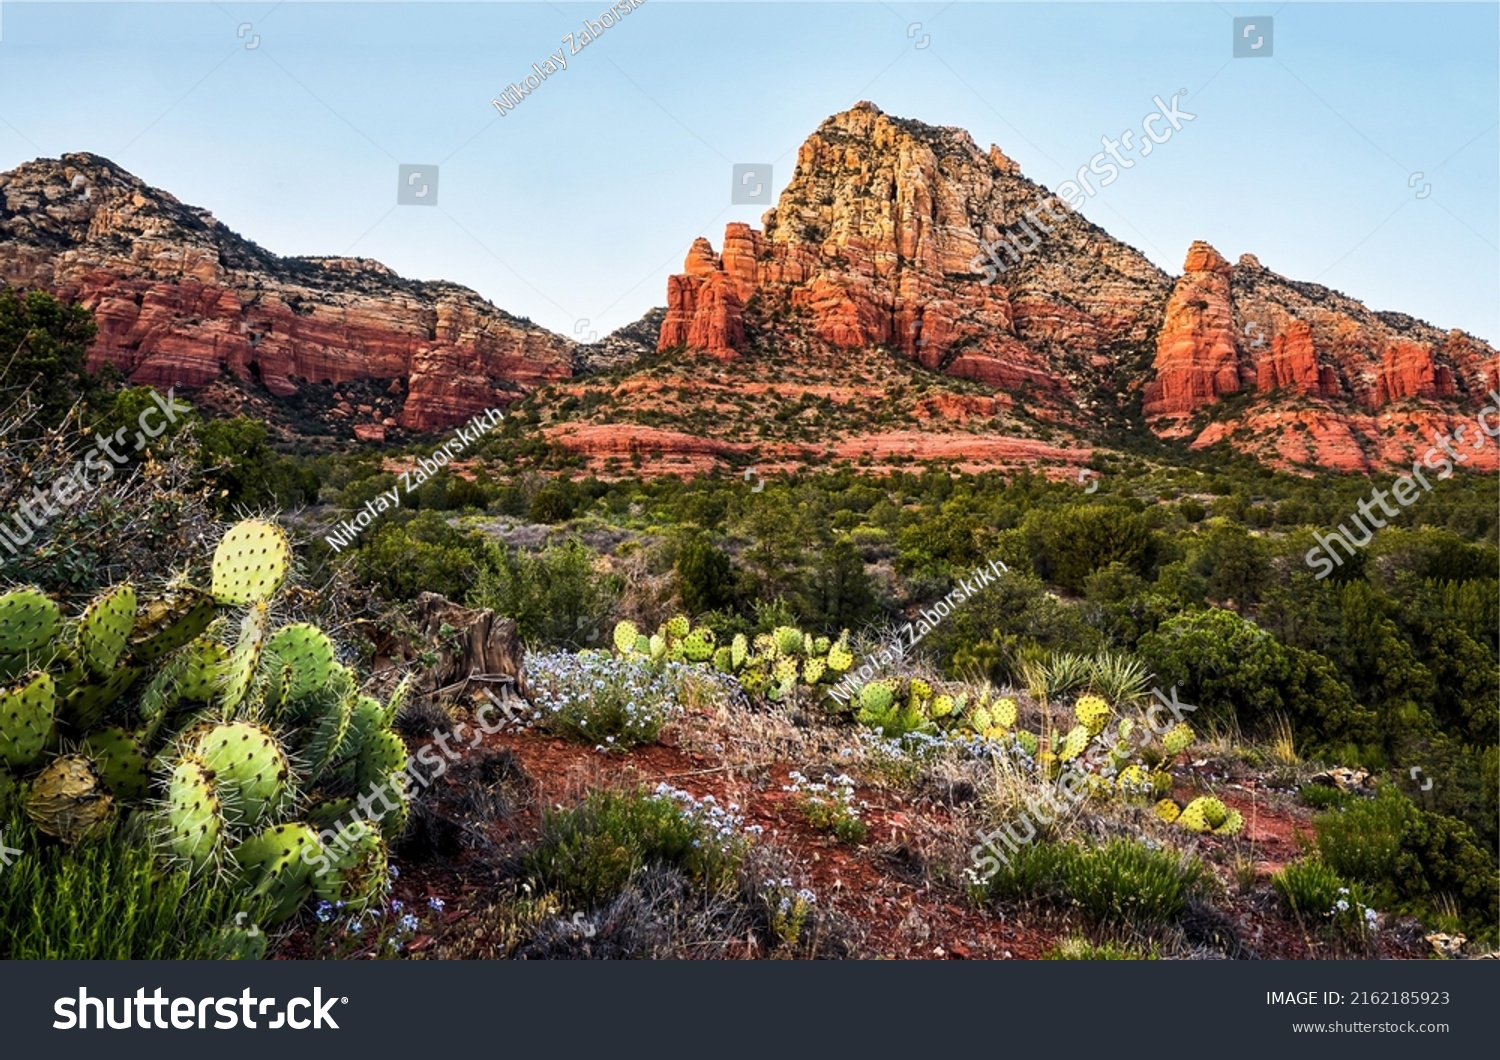 Cactus desert in the canyon. Canyon desert with cactuses. Canyon cactus desert landscape. Red canyon desert scene #2162185923